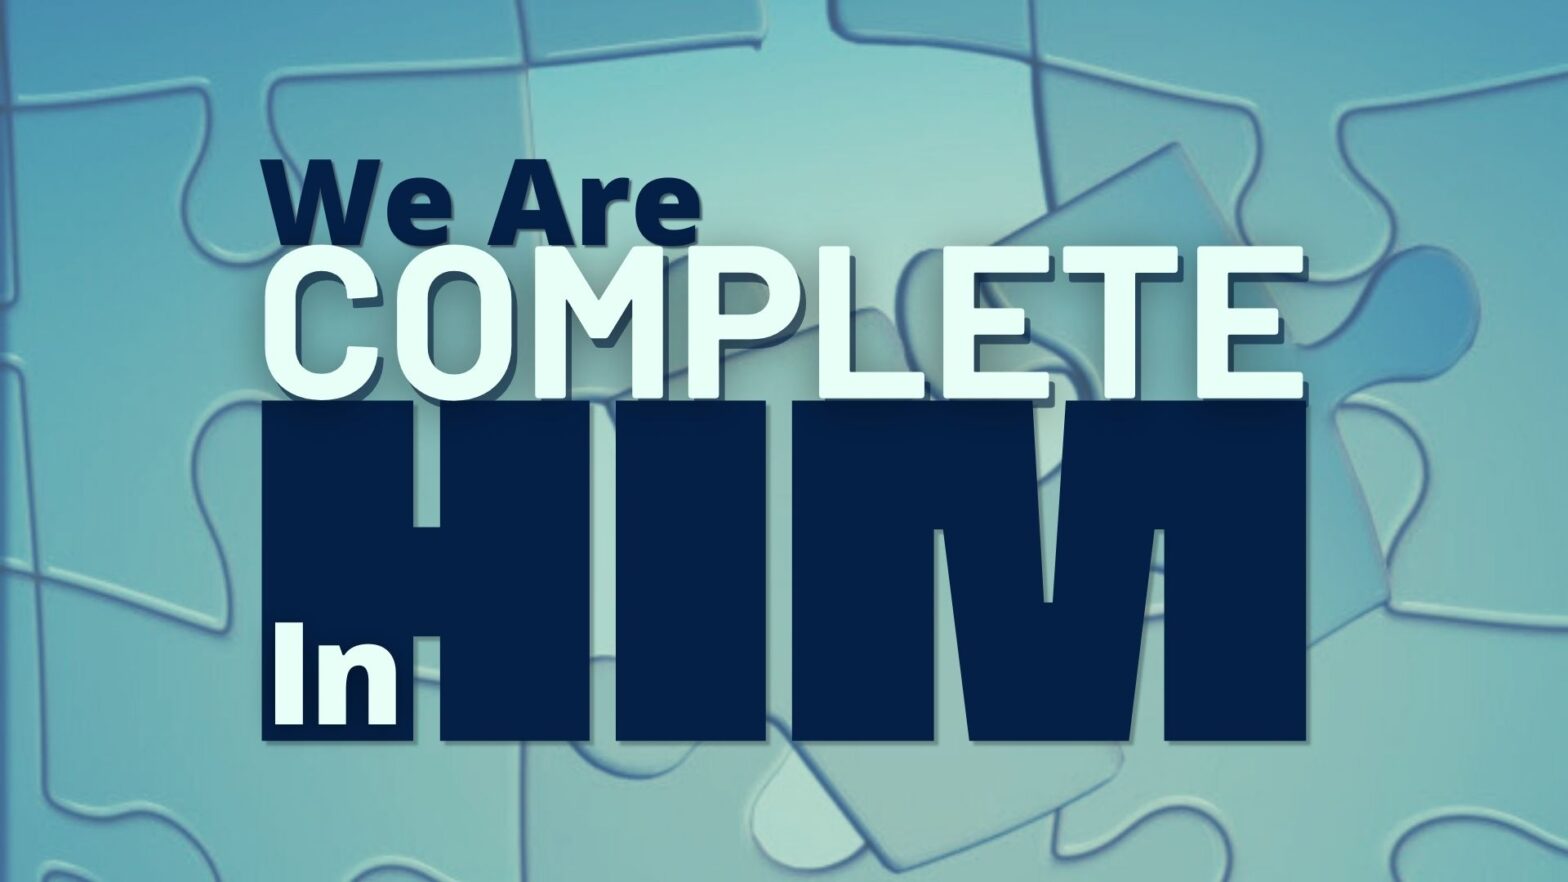 We Are Complete In Him